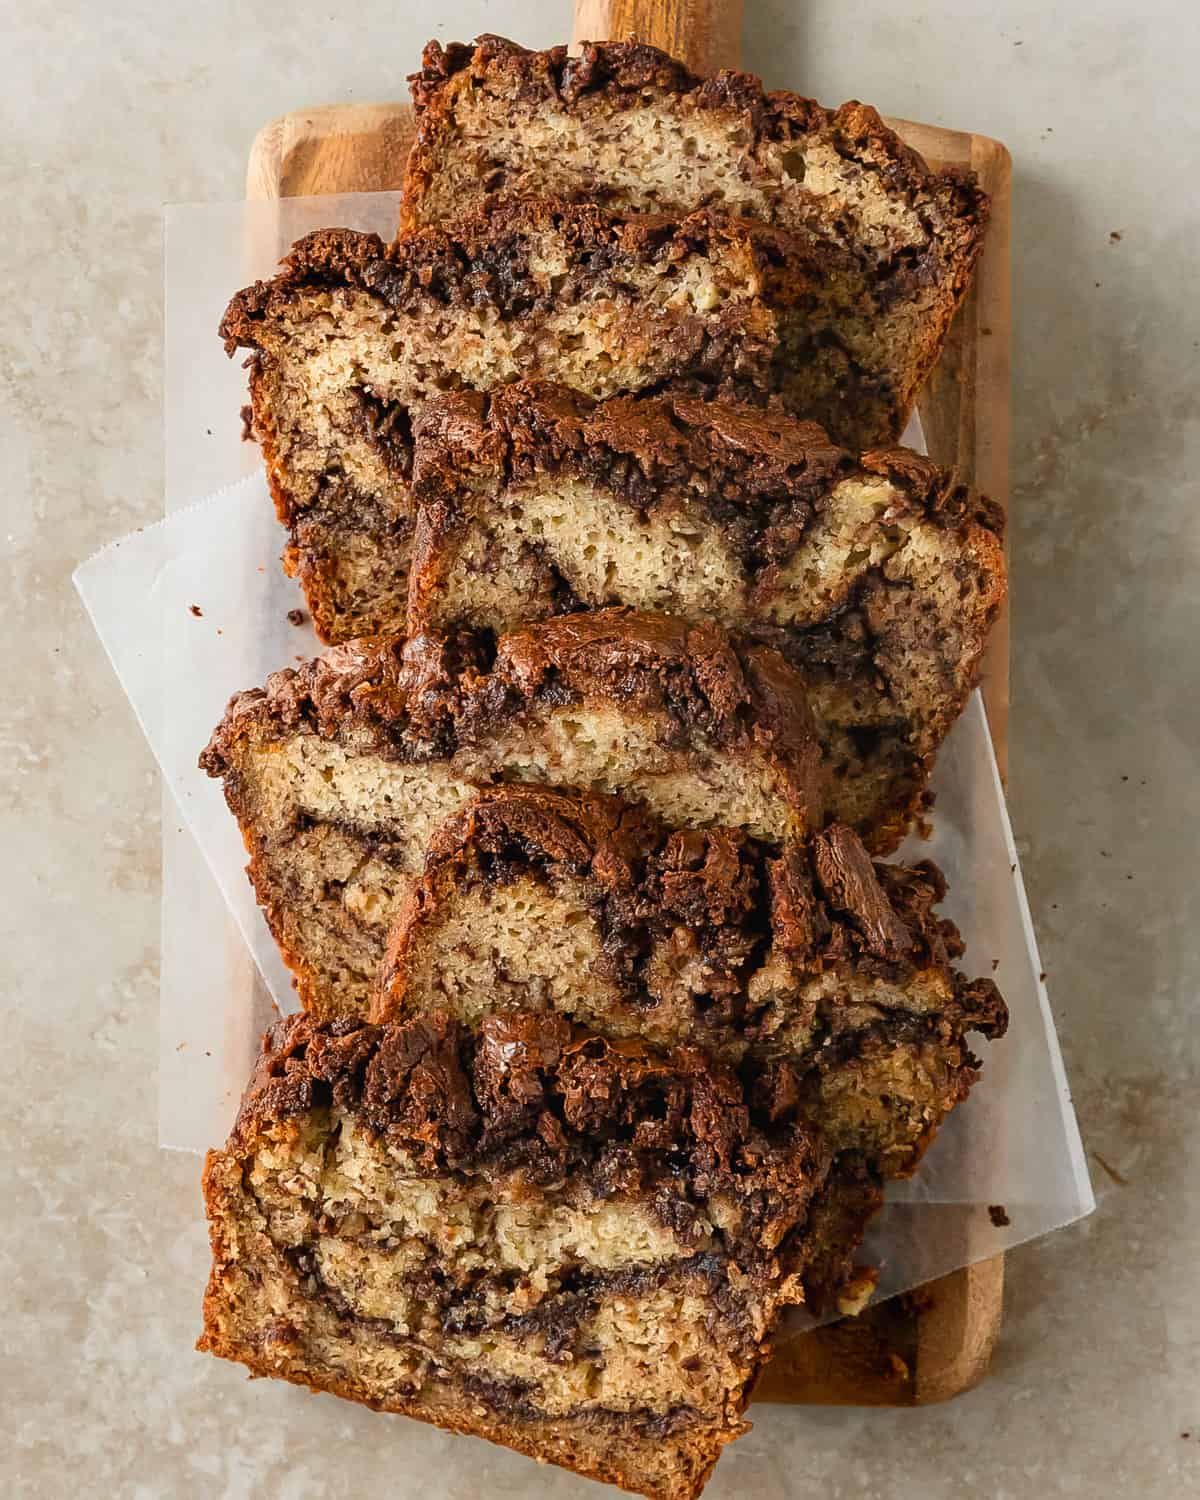 Nutella banana bread is a soft and wonderfully moist banana bread with thick ribbons of deeply rich Nutella swirled into every bite.  This banana bread and nutella recipe is quick, easy to make and is the perfect breakfast or dessert everyone will love. 